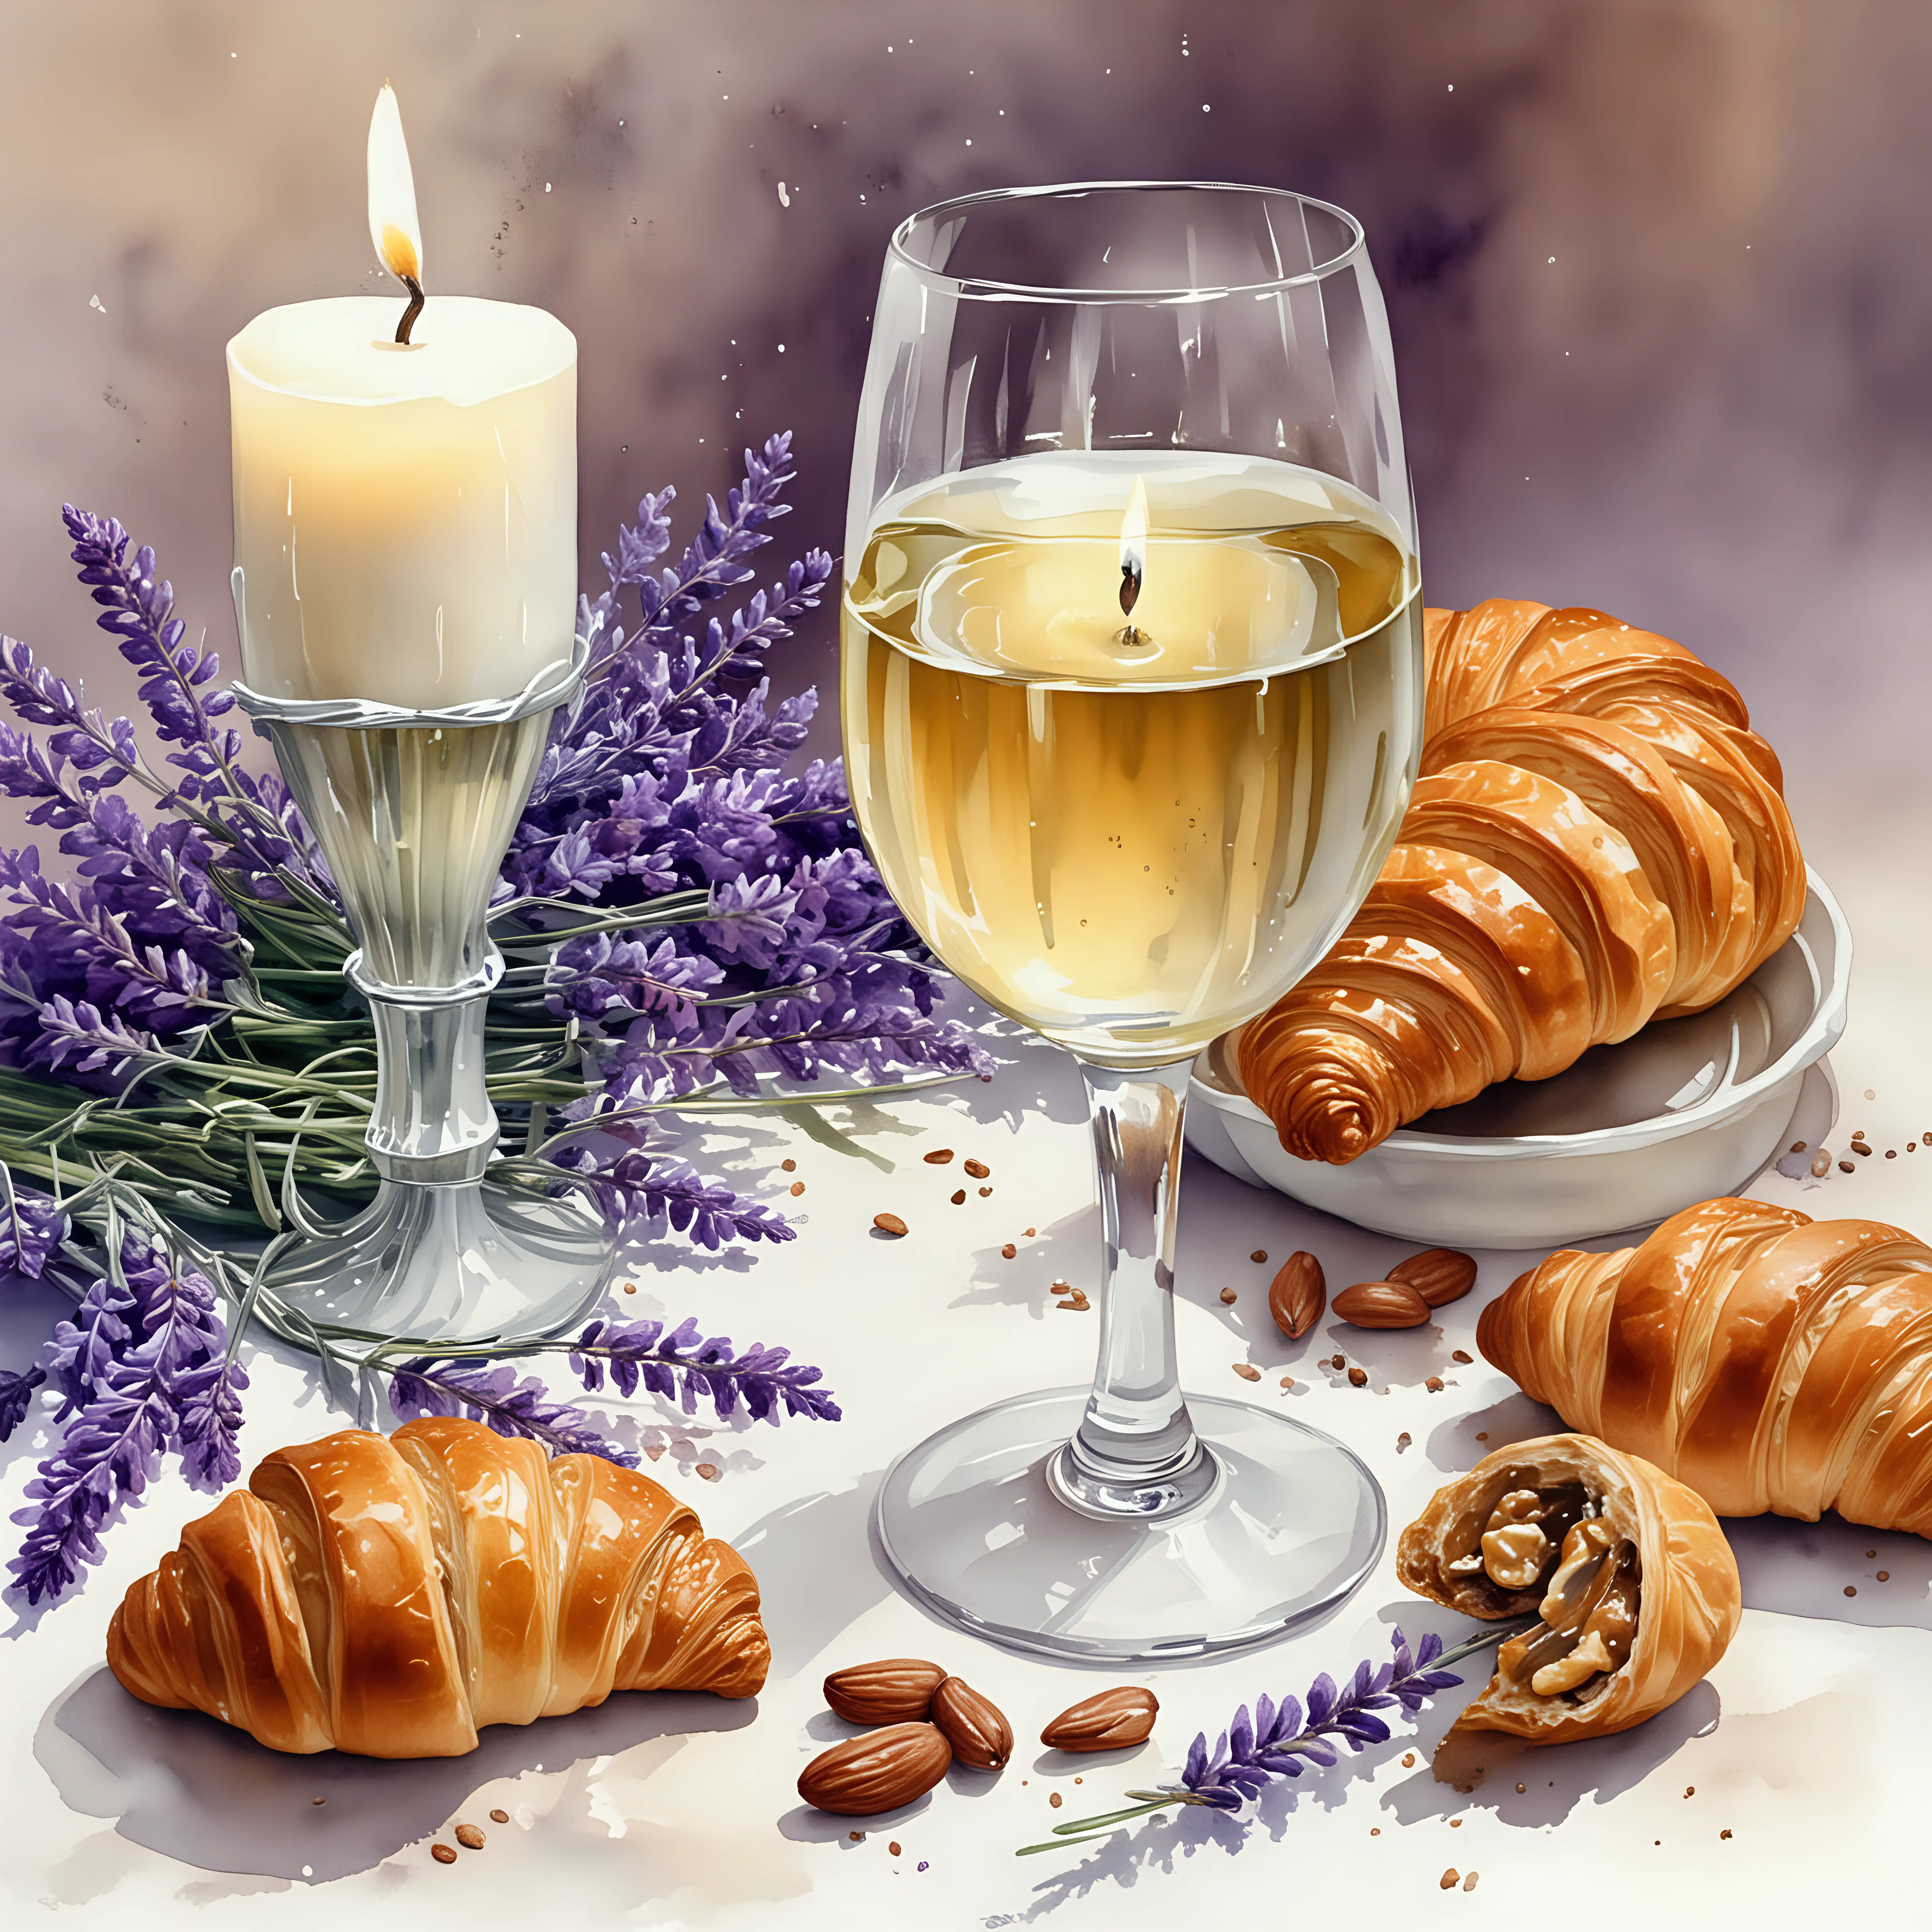 Watercolor Painting of Elegant French Breakfast with White Wine and Lavender Bouquet